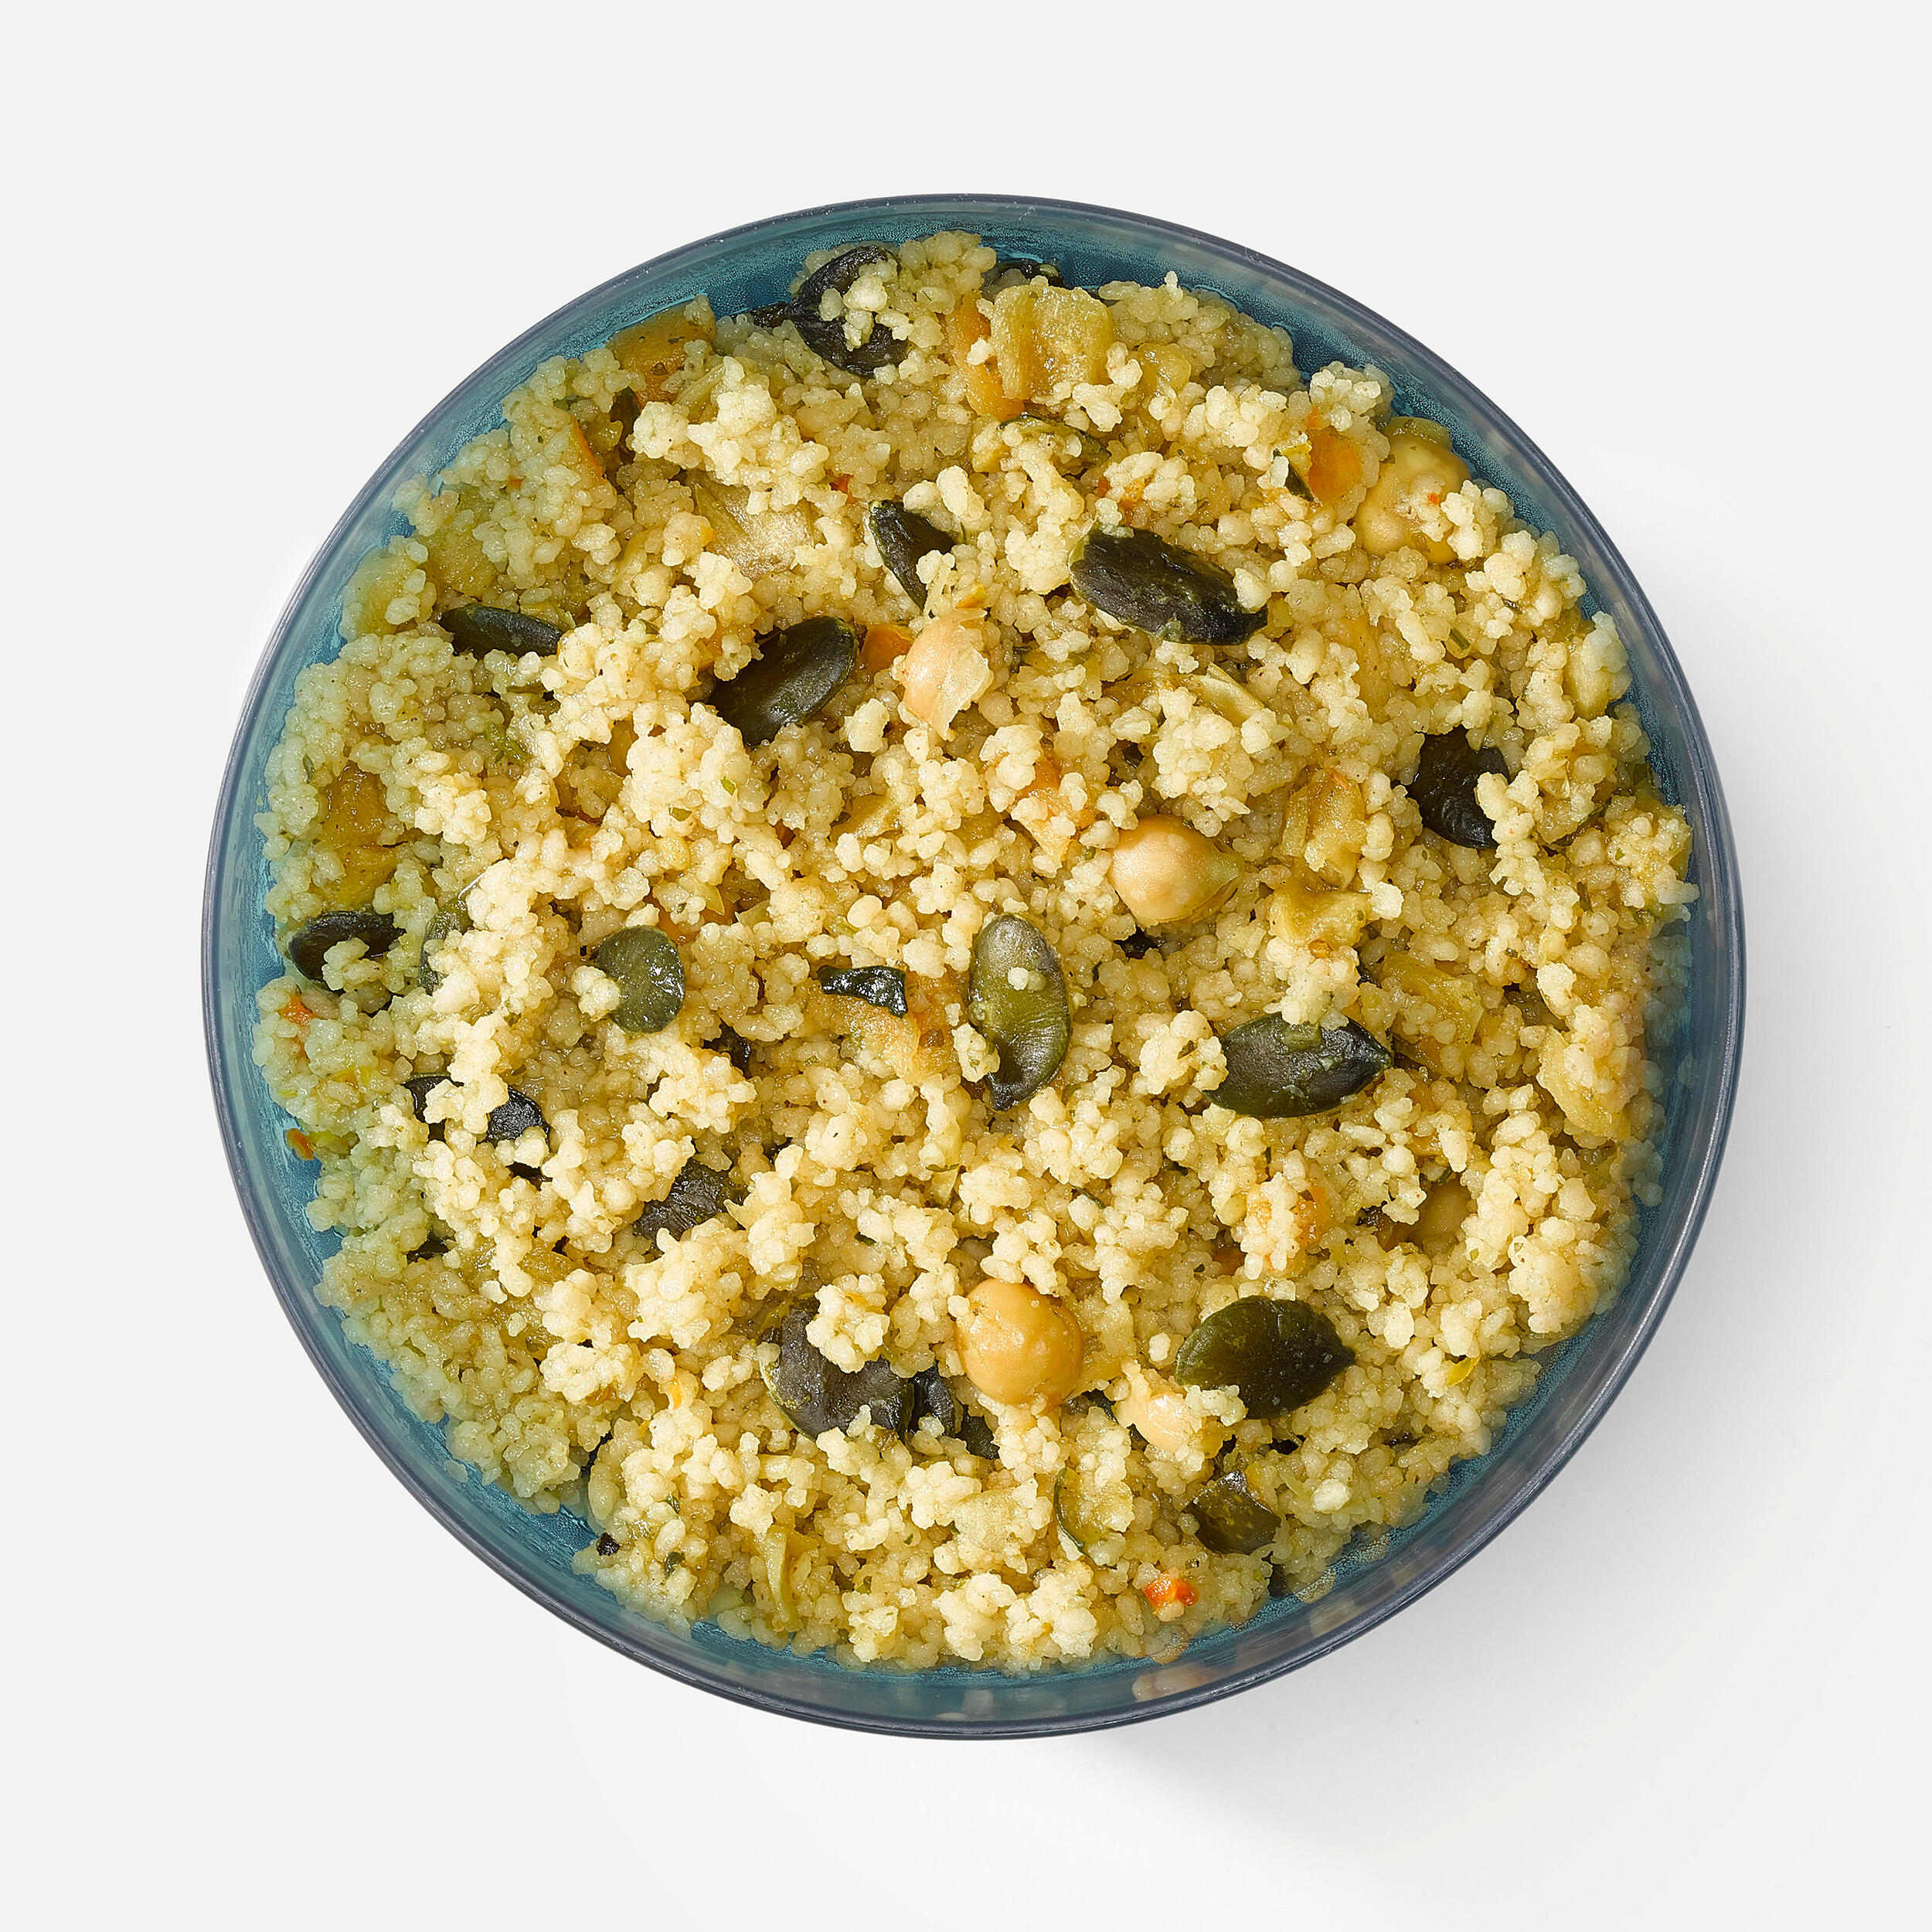 Organic dehydrated vegetarian meal - Semolina with vegetables -  100g 2/3